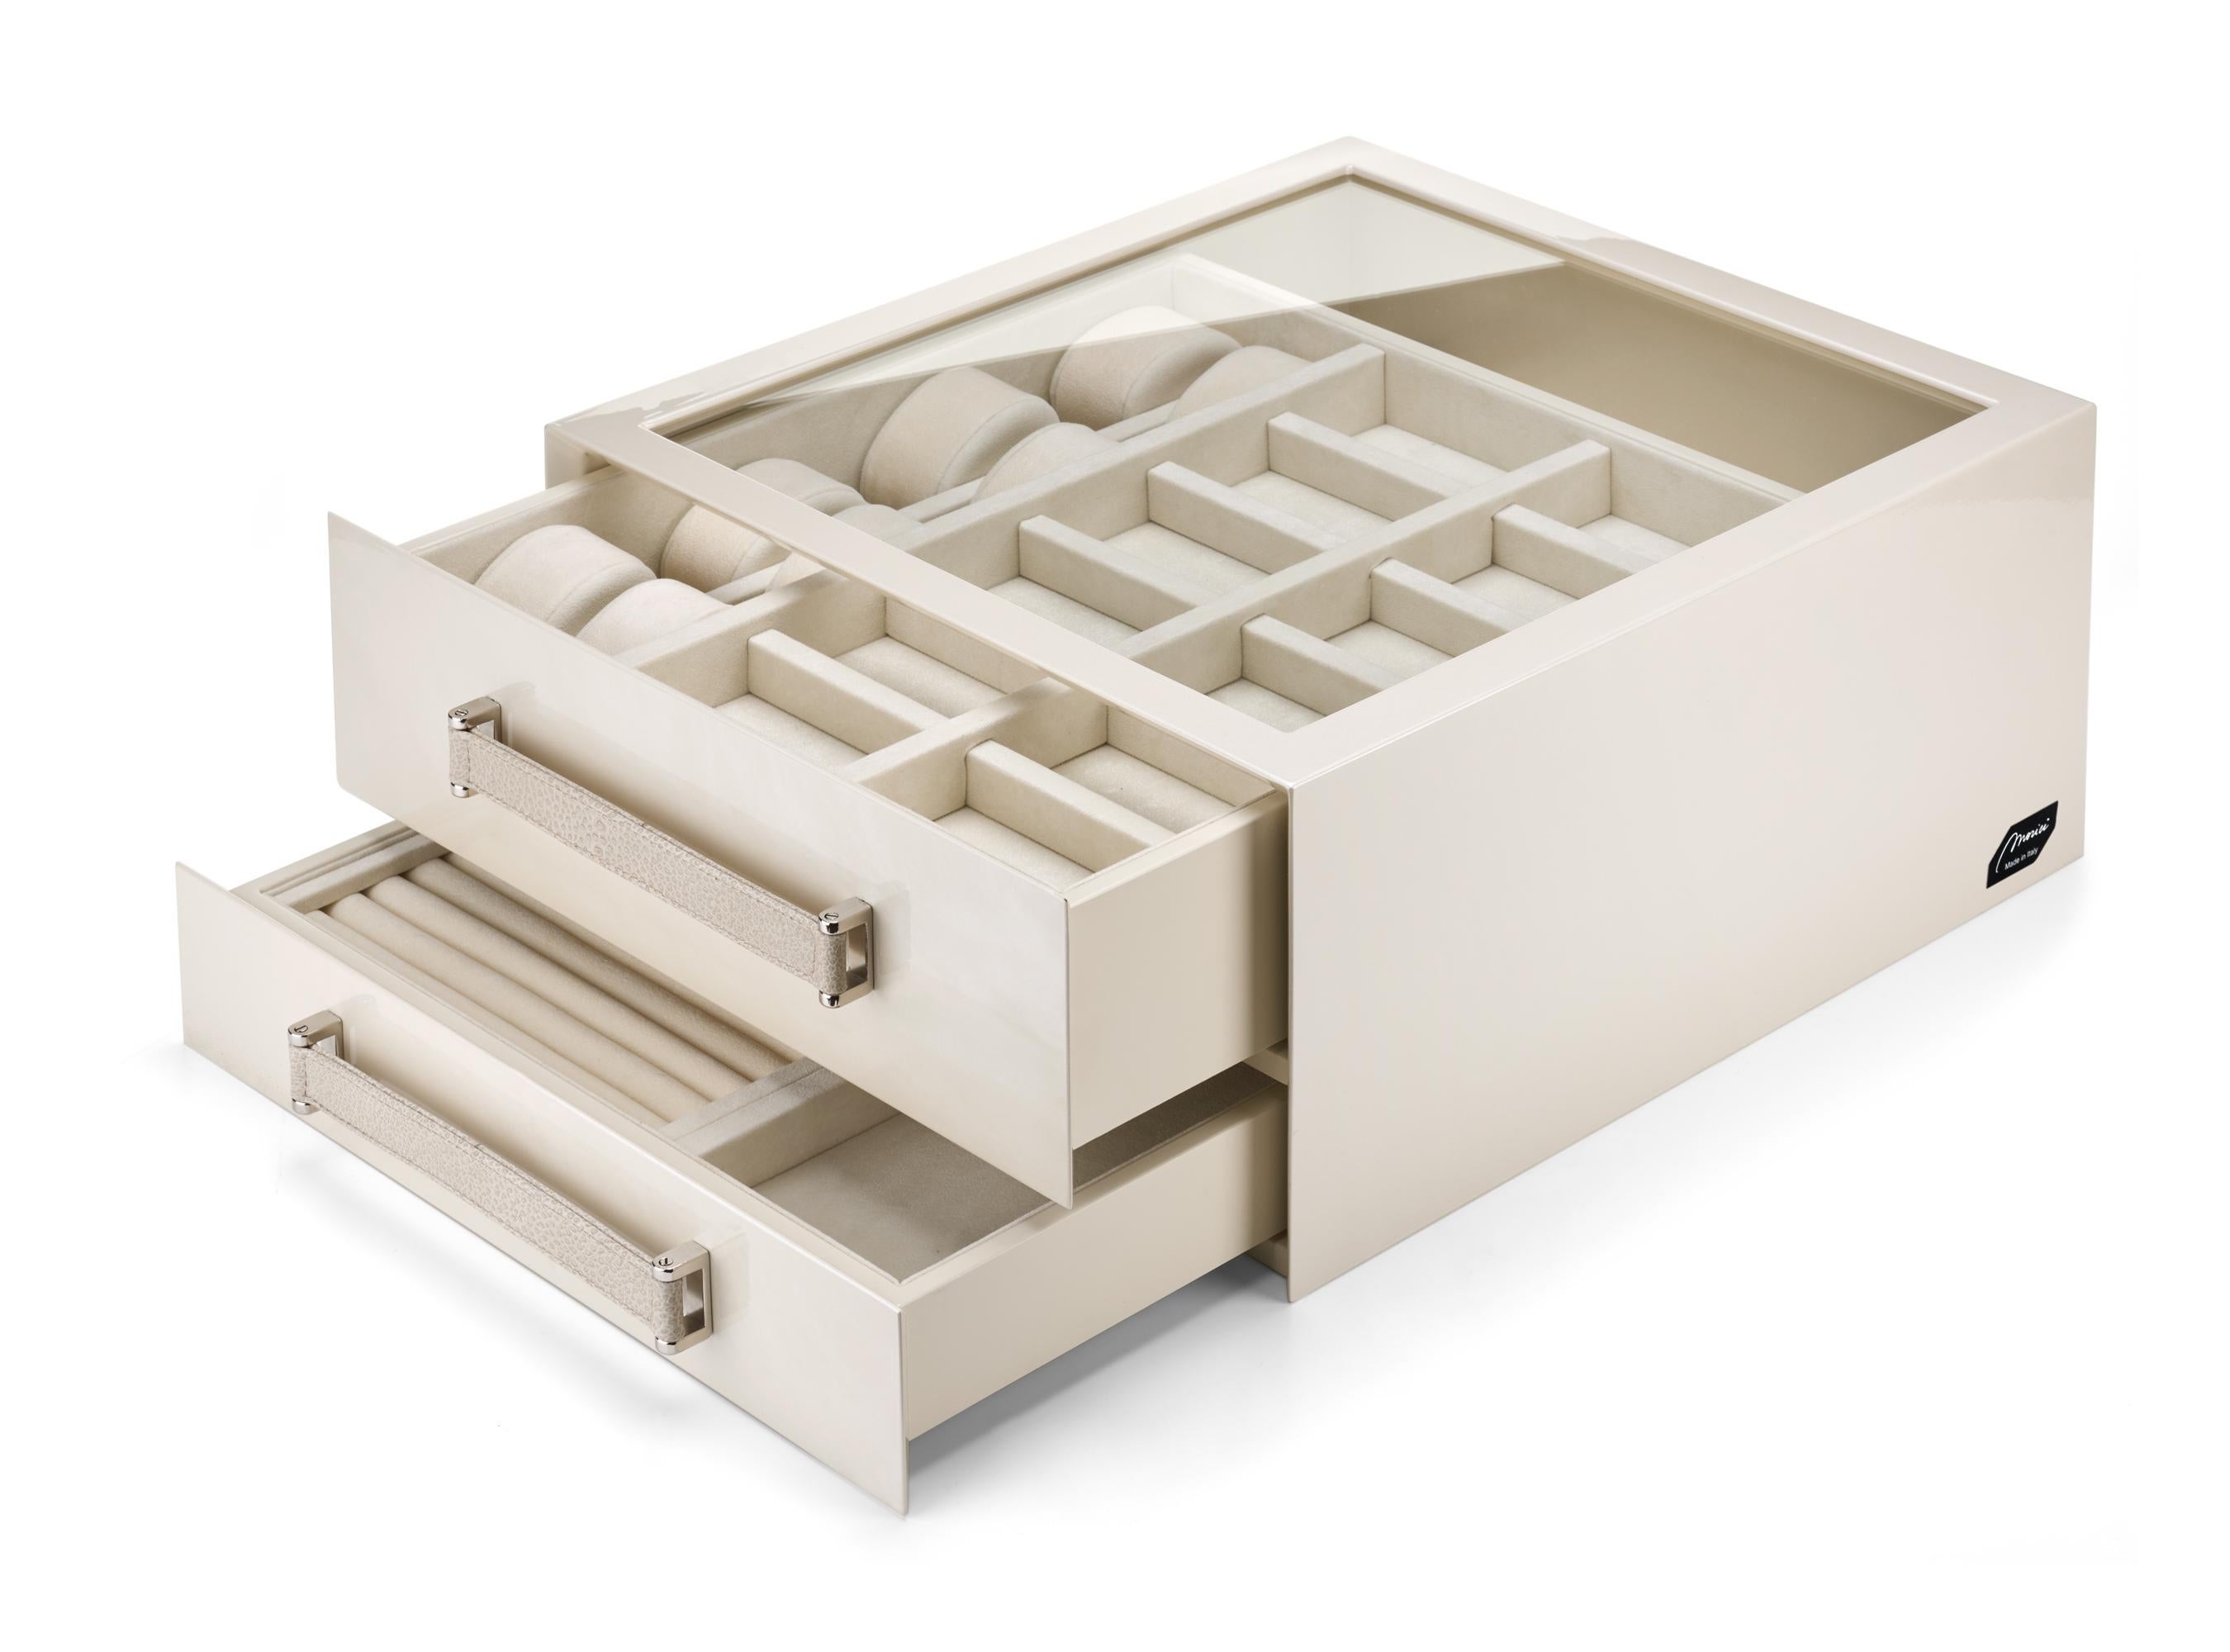 A clean and essential design of sophisticated contemporary flair, this jewelry box is distinguished by a mother of pearl color obtained with a brushed and polished polyester finish. Handcrafted of wood, it is enriched with silver-finished metal